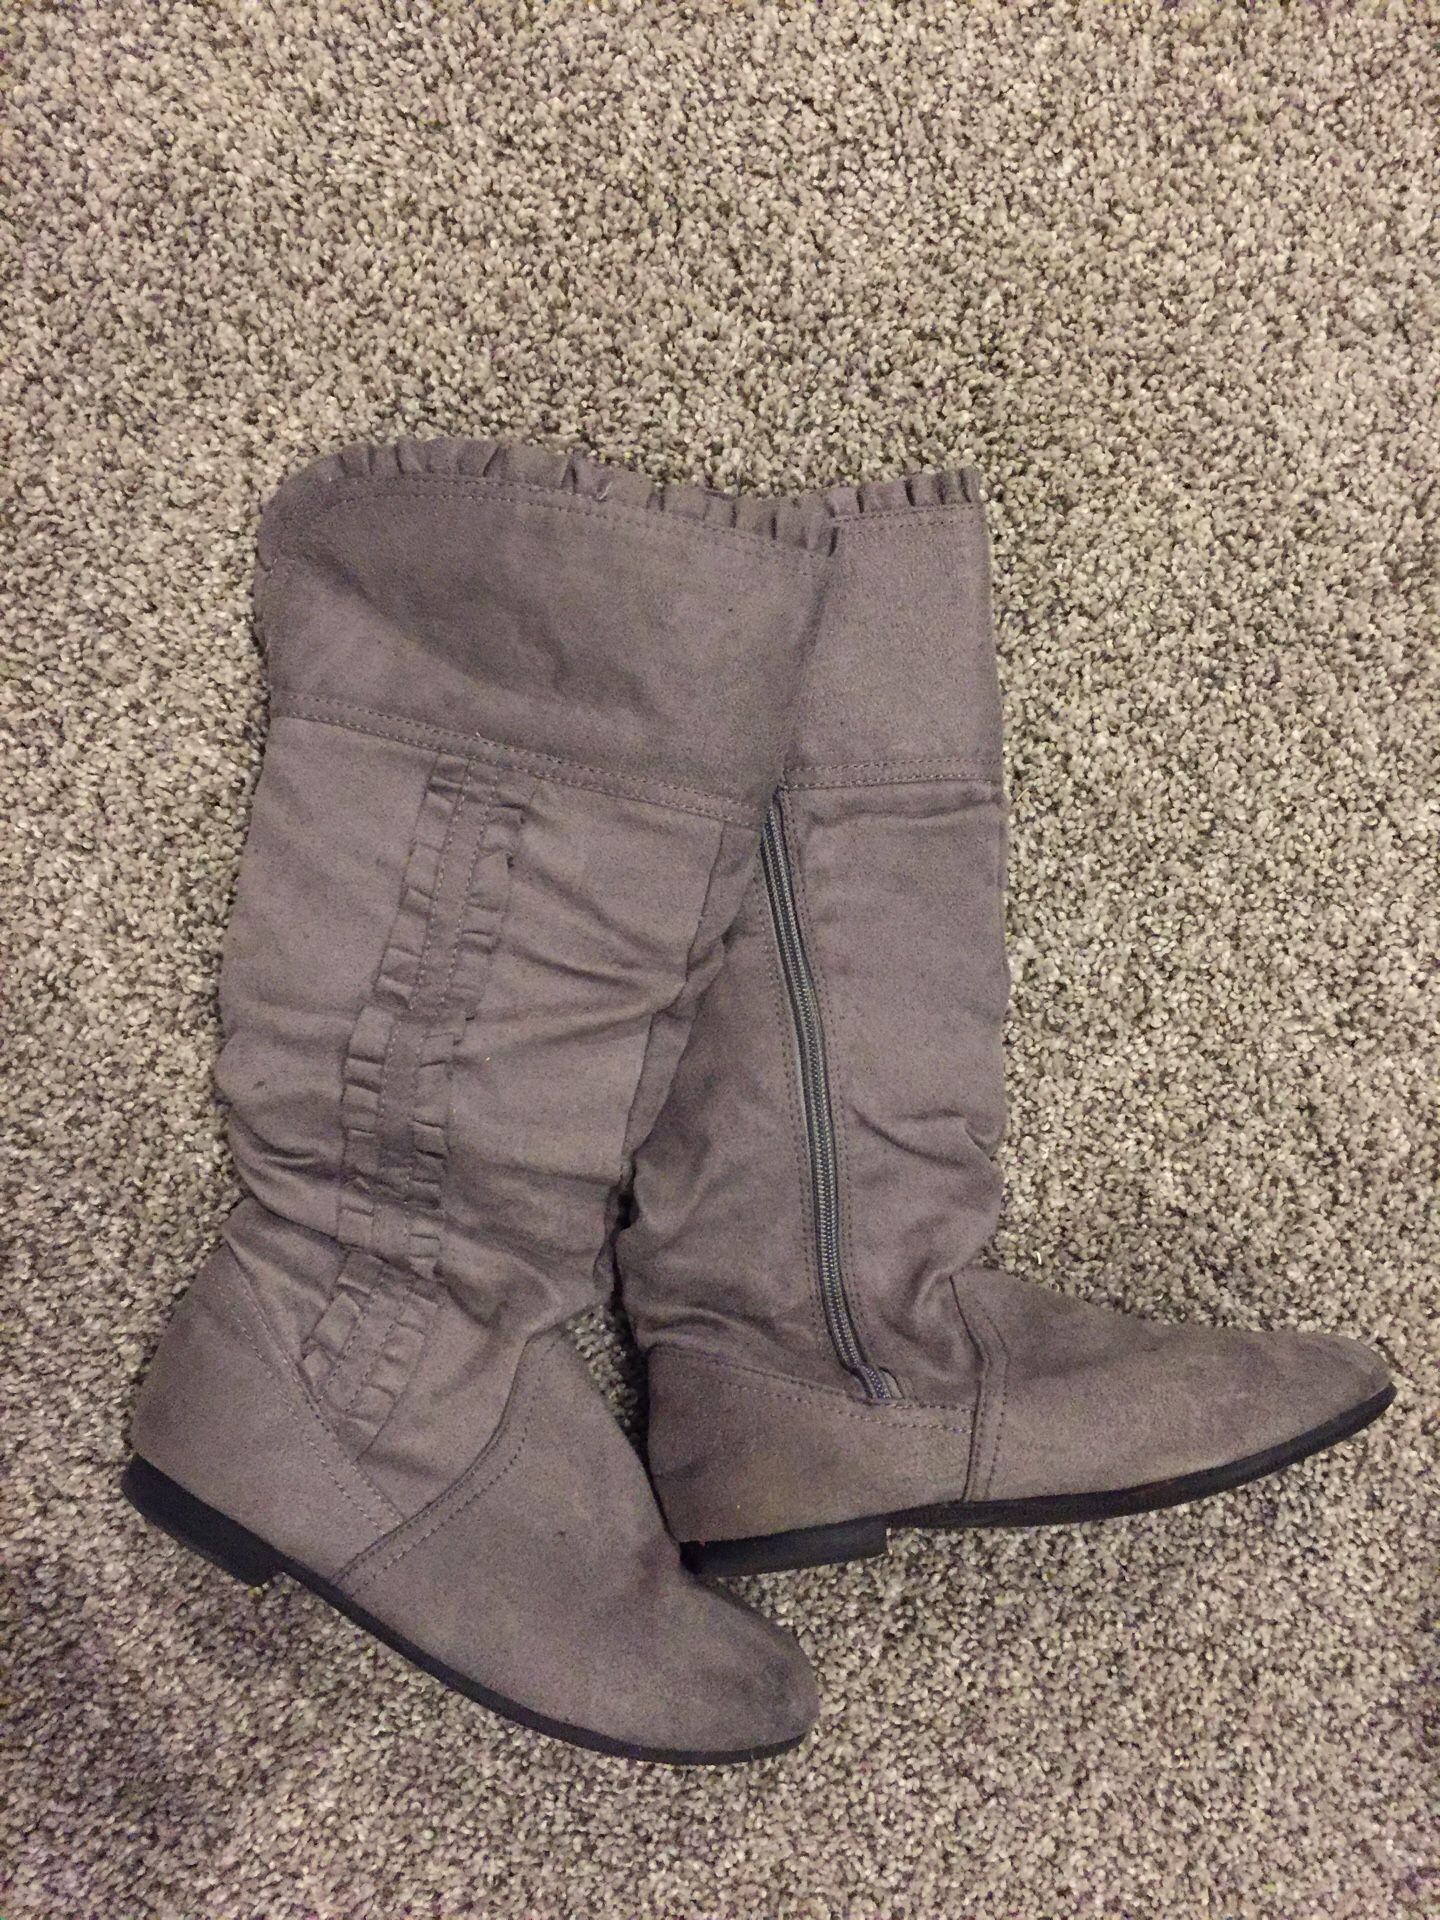 Girls boots, shoes size 13